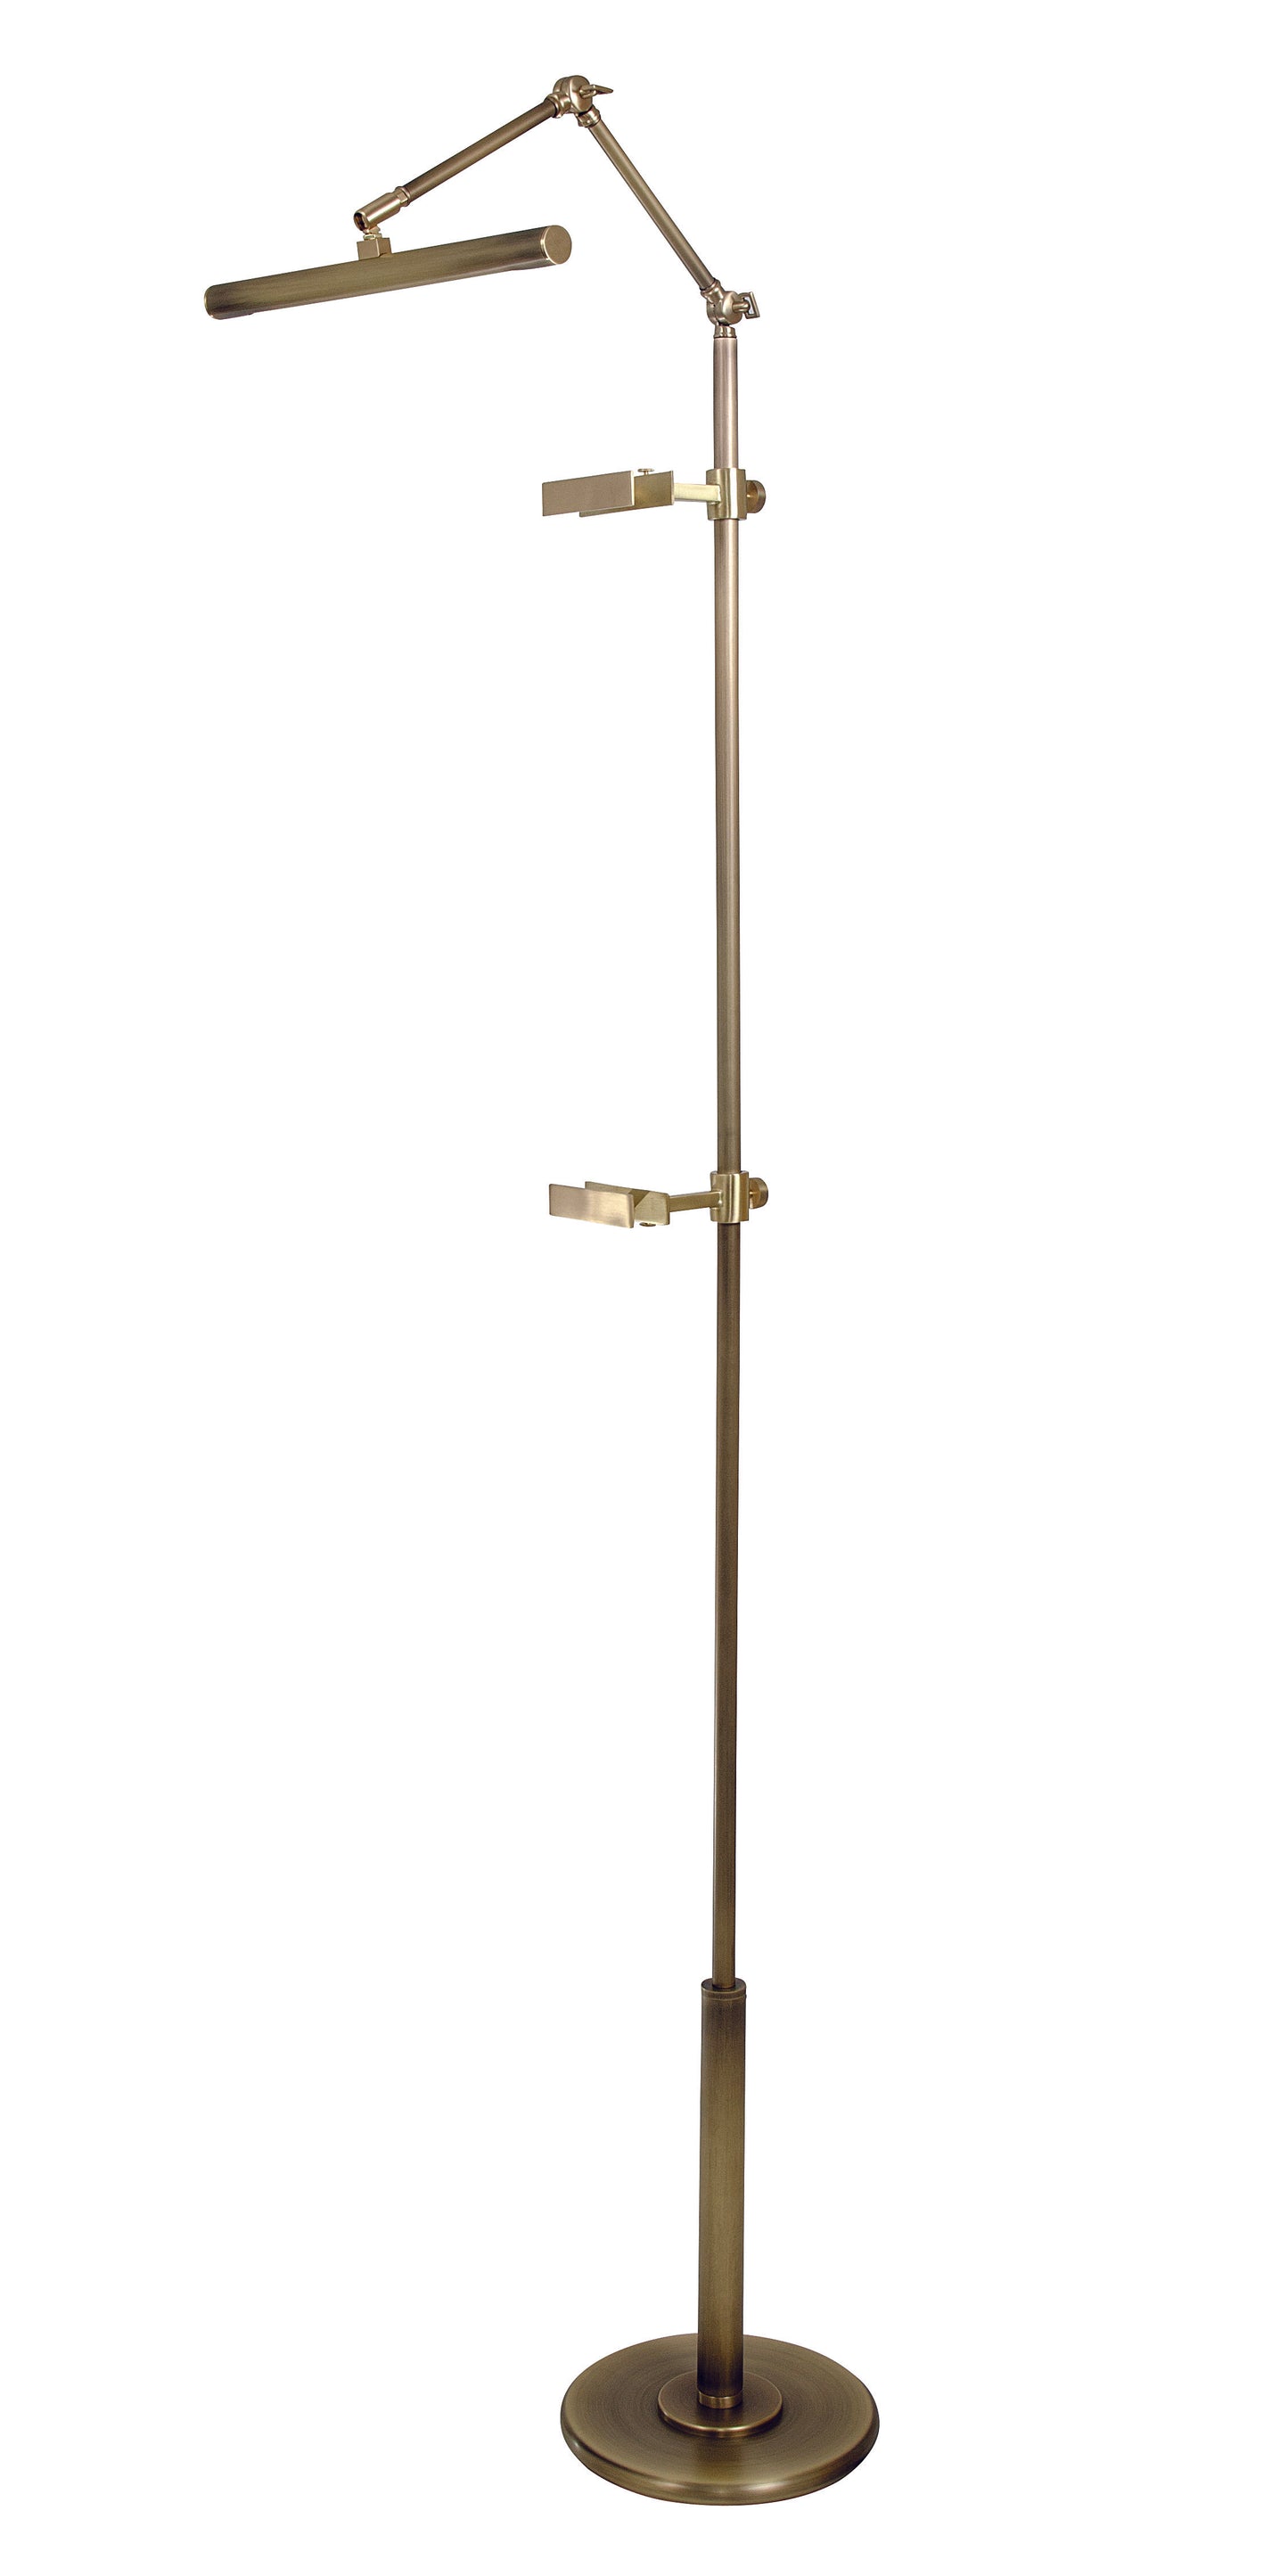 House of Troy River North Easel Floor Lamp Antique Brass Satin Brass Accents LED Slimline RN300-AB-SB